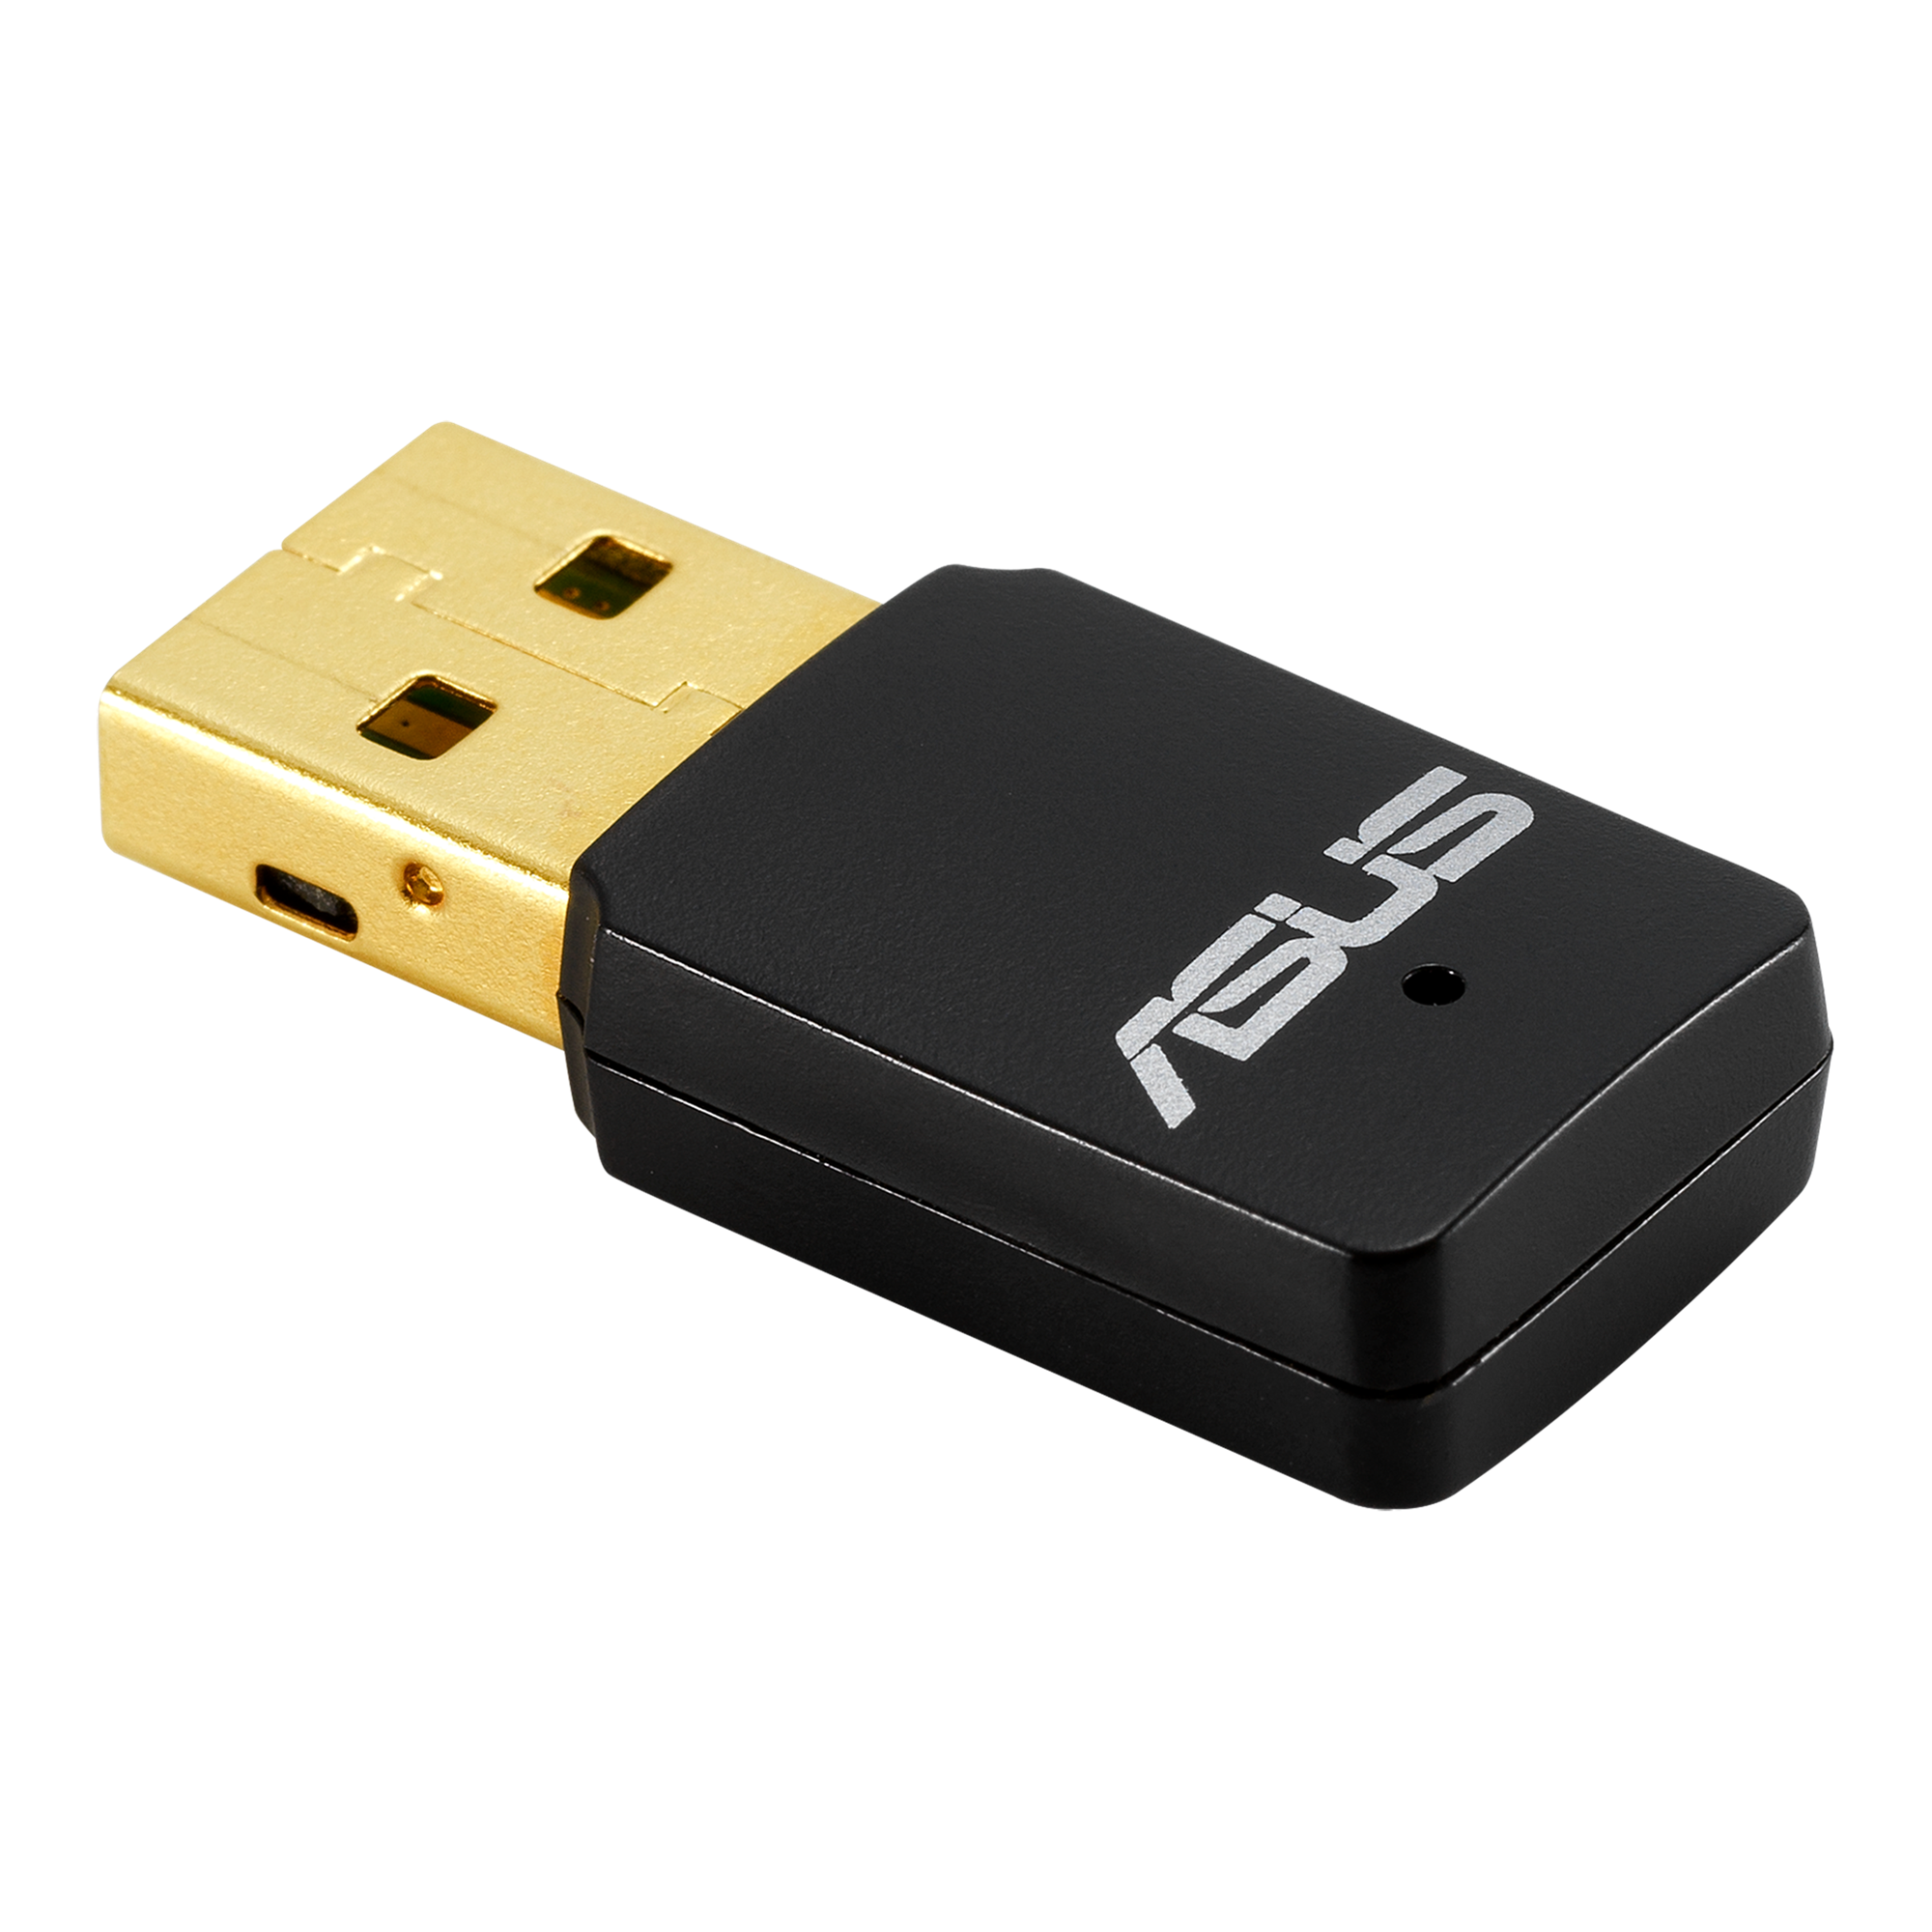 Mangler hack frugthave USB-N13 C1｜Wireless & Wired Adapters｜ASUS USA